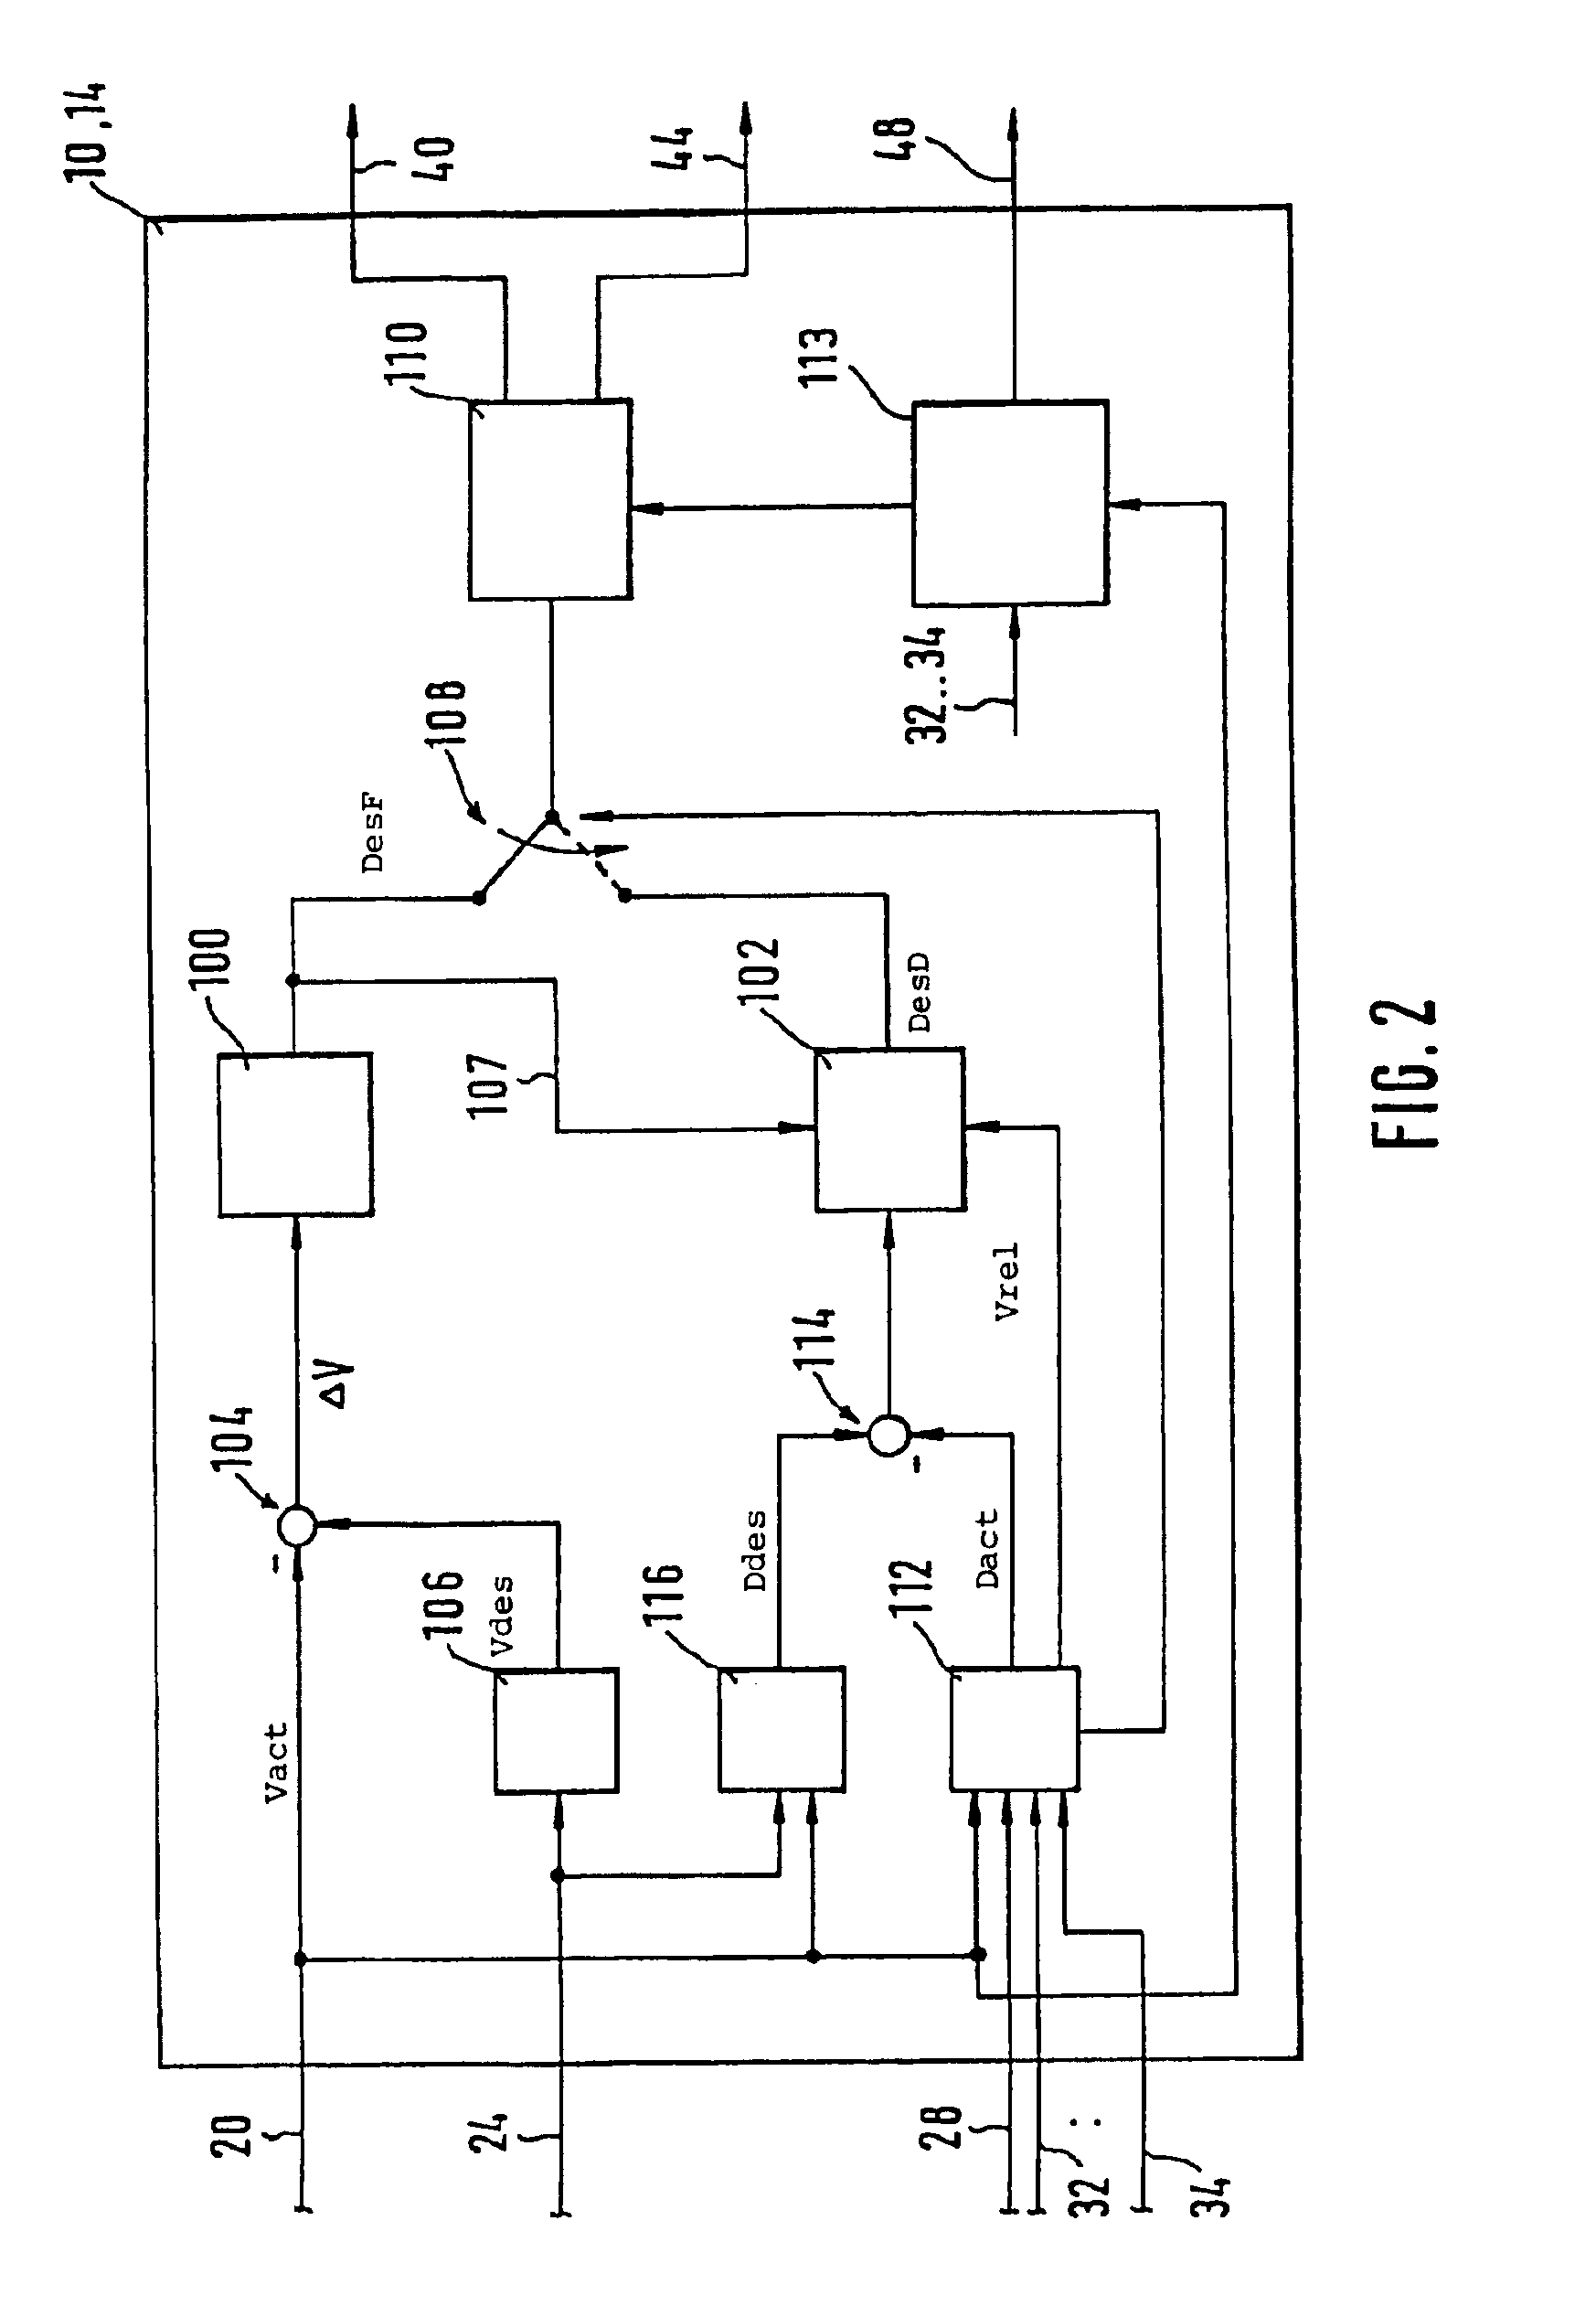 Method and device for securing the standstill of a vehicle, notably in conjunction with a vehicle speed control